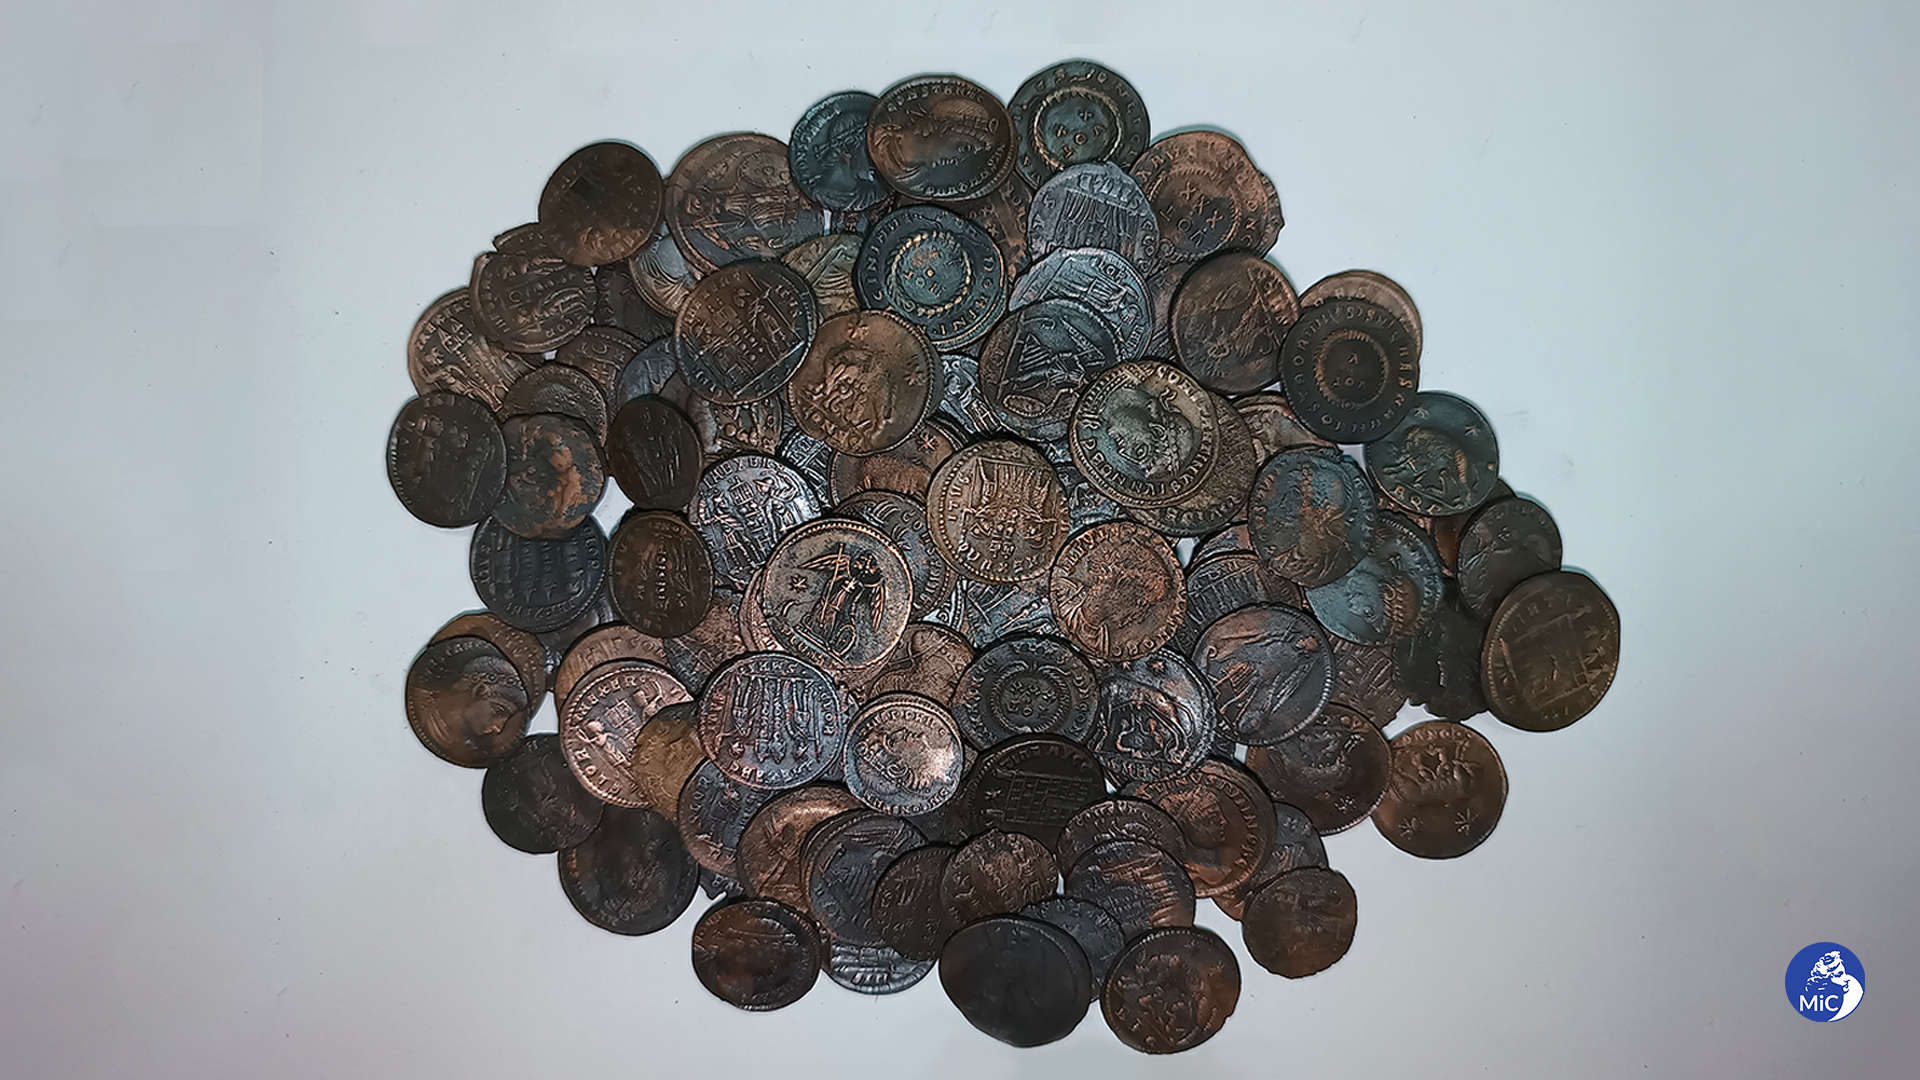 Extraordinary discovery in well-preserved of treasure coins Sardinia: trove huge Roman